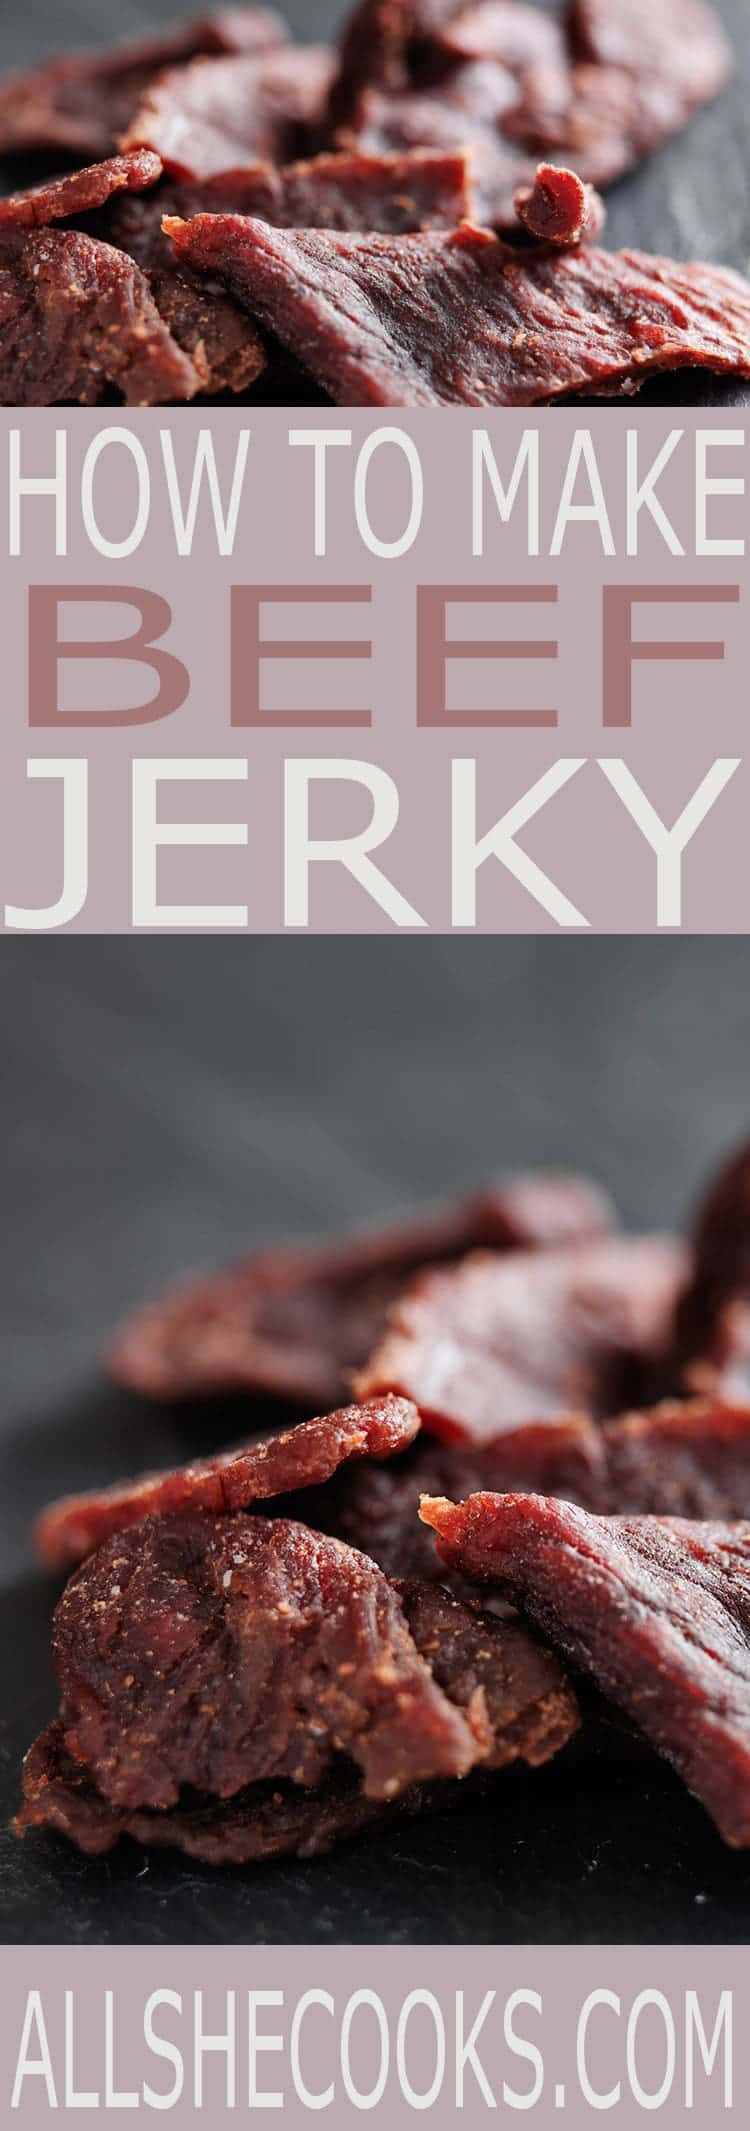 Learn how to make beef jerky at home. This is a delicious snack and high in protein which makes it a healthy snack choice.